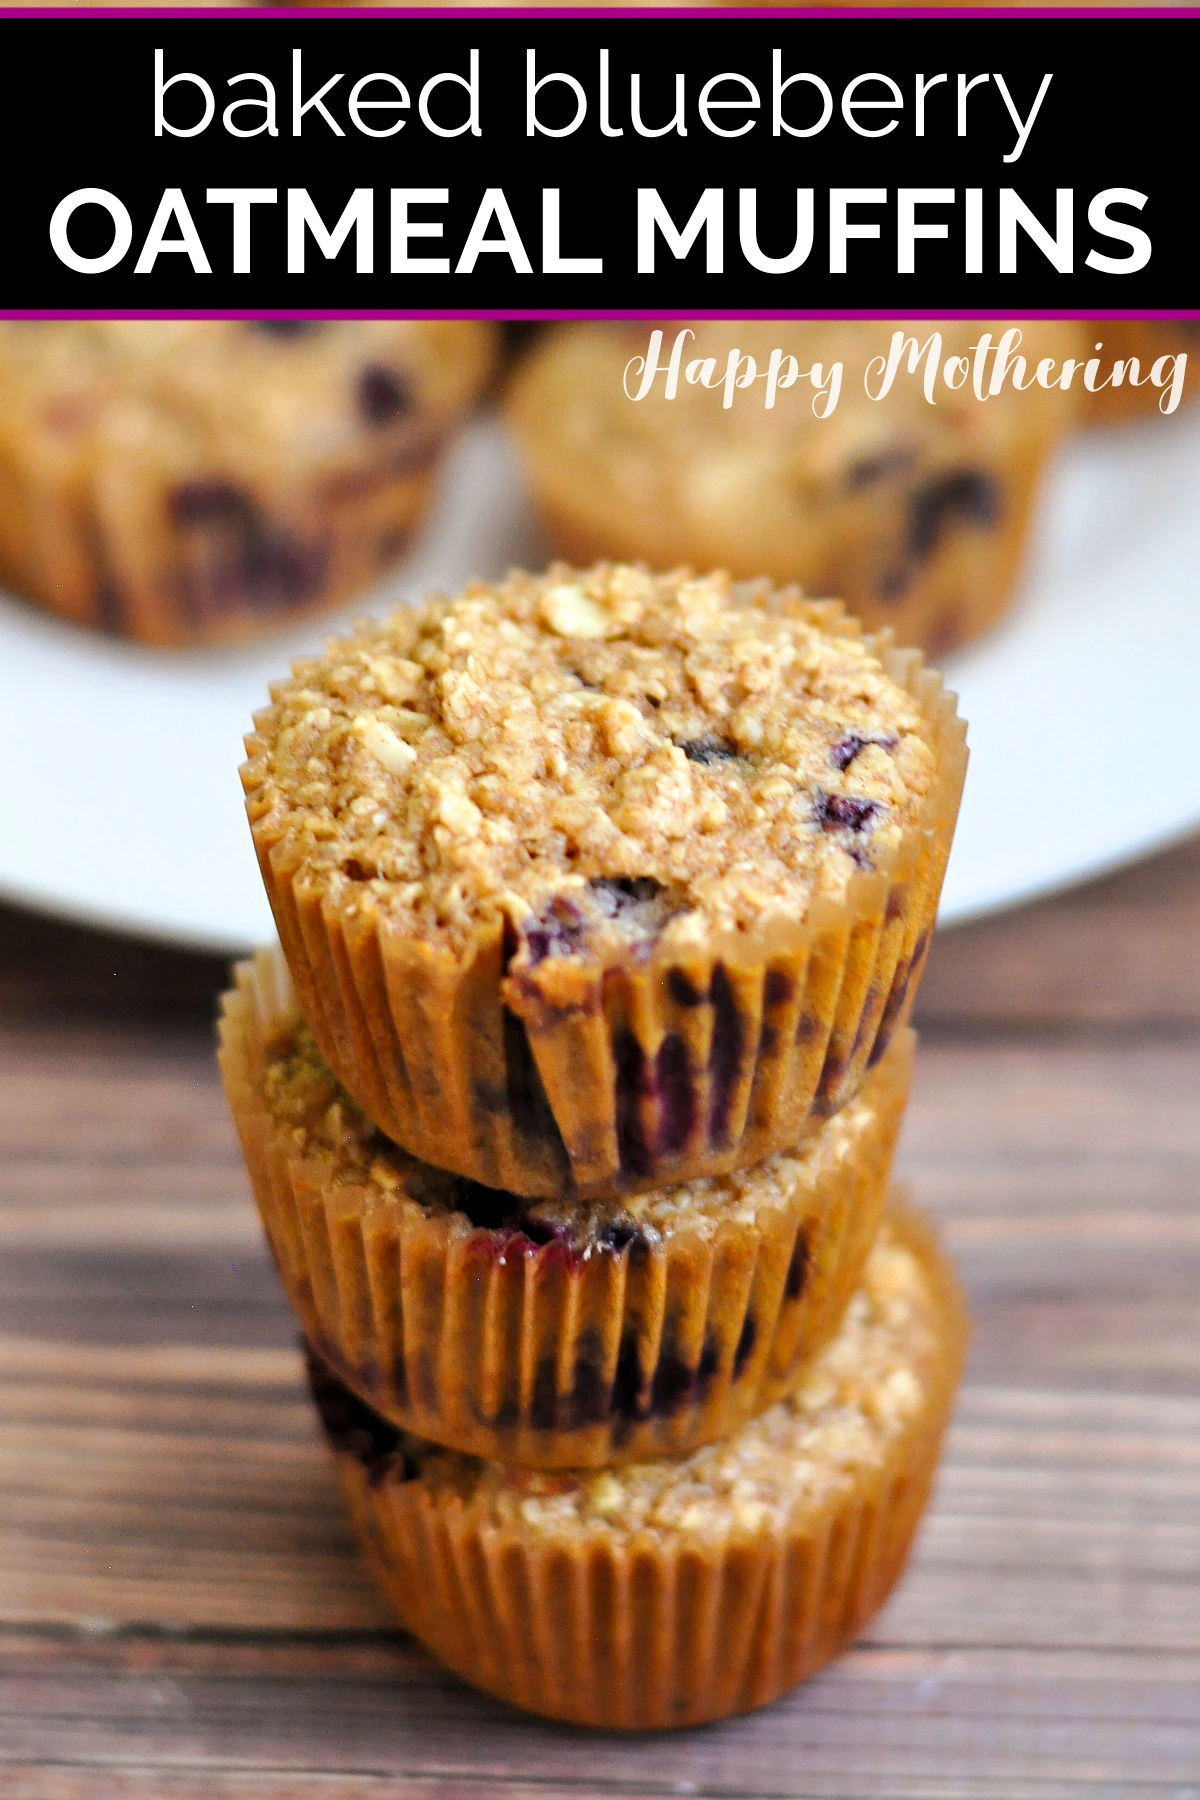 Three Blueberry Baked Oatmeal Muffins stacked up in front of the muffin pan